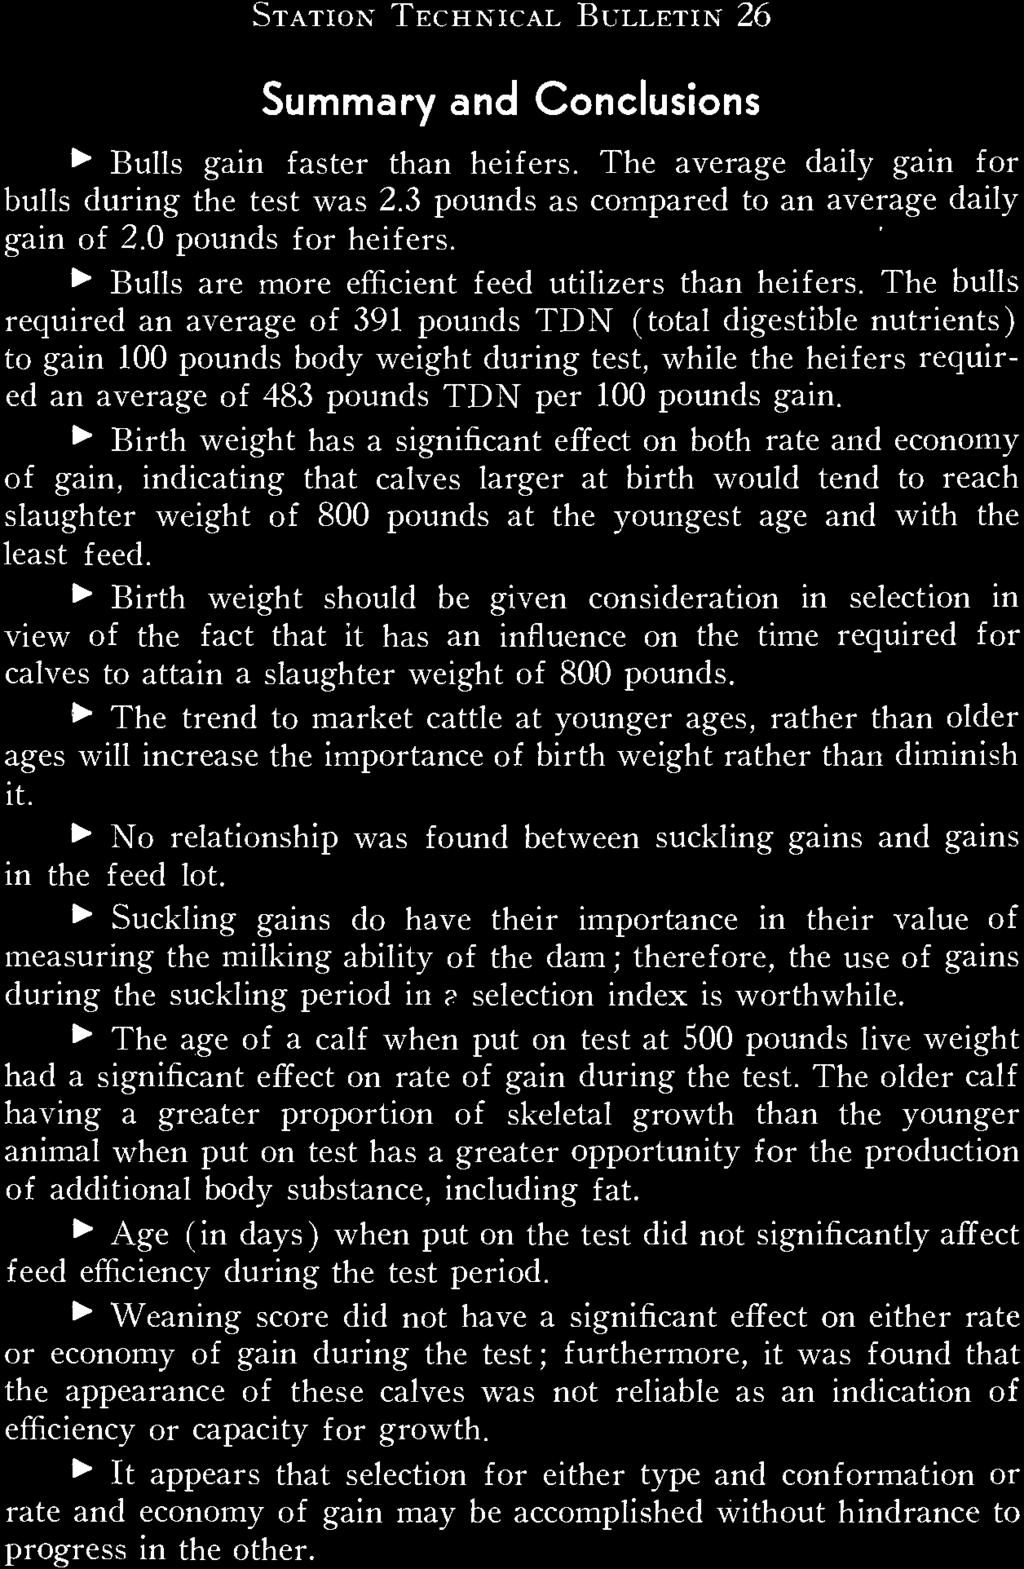 The bulls required an average of 391 pounds TDN (total digestible nutrients) to gain 100 pounds body weight during test, while the heifers required an average of 483 pounds TDN per 100 pounds gain.